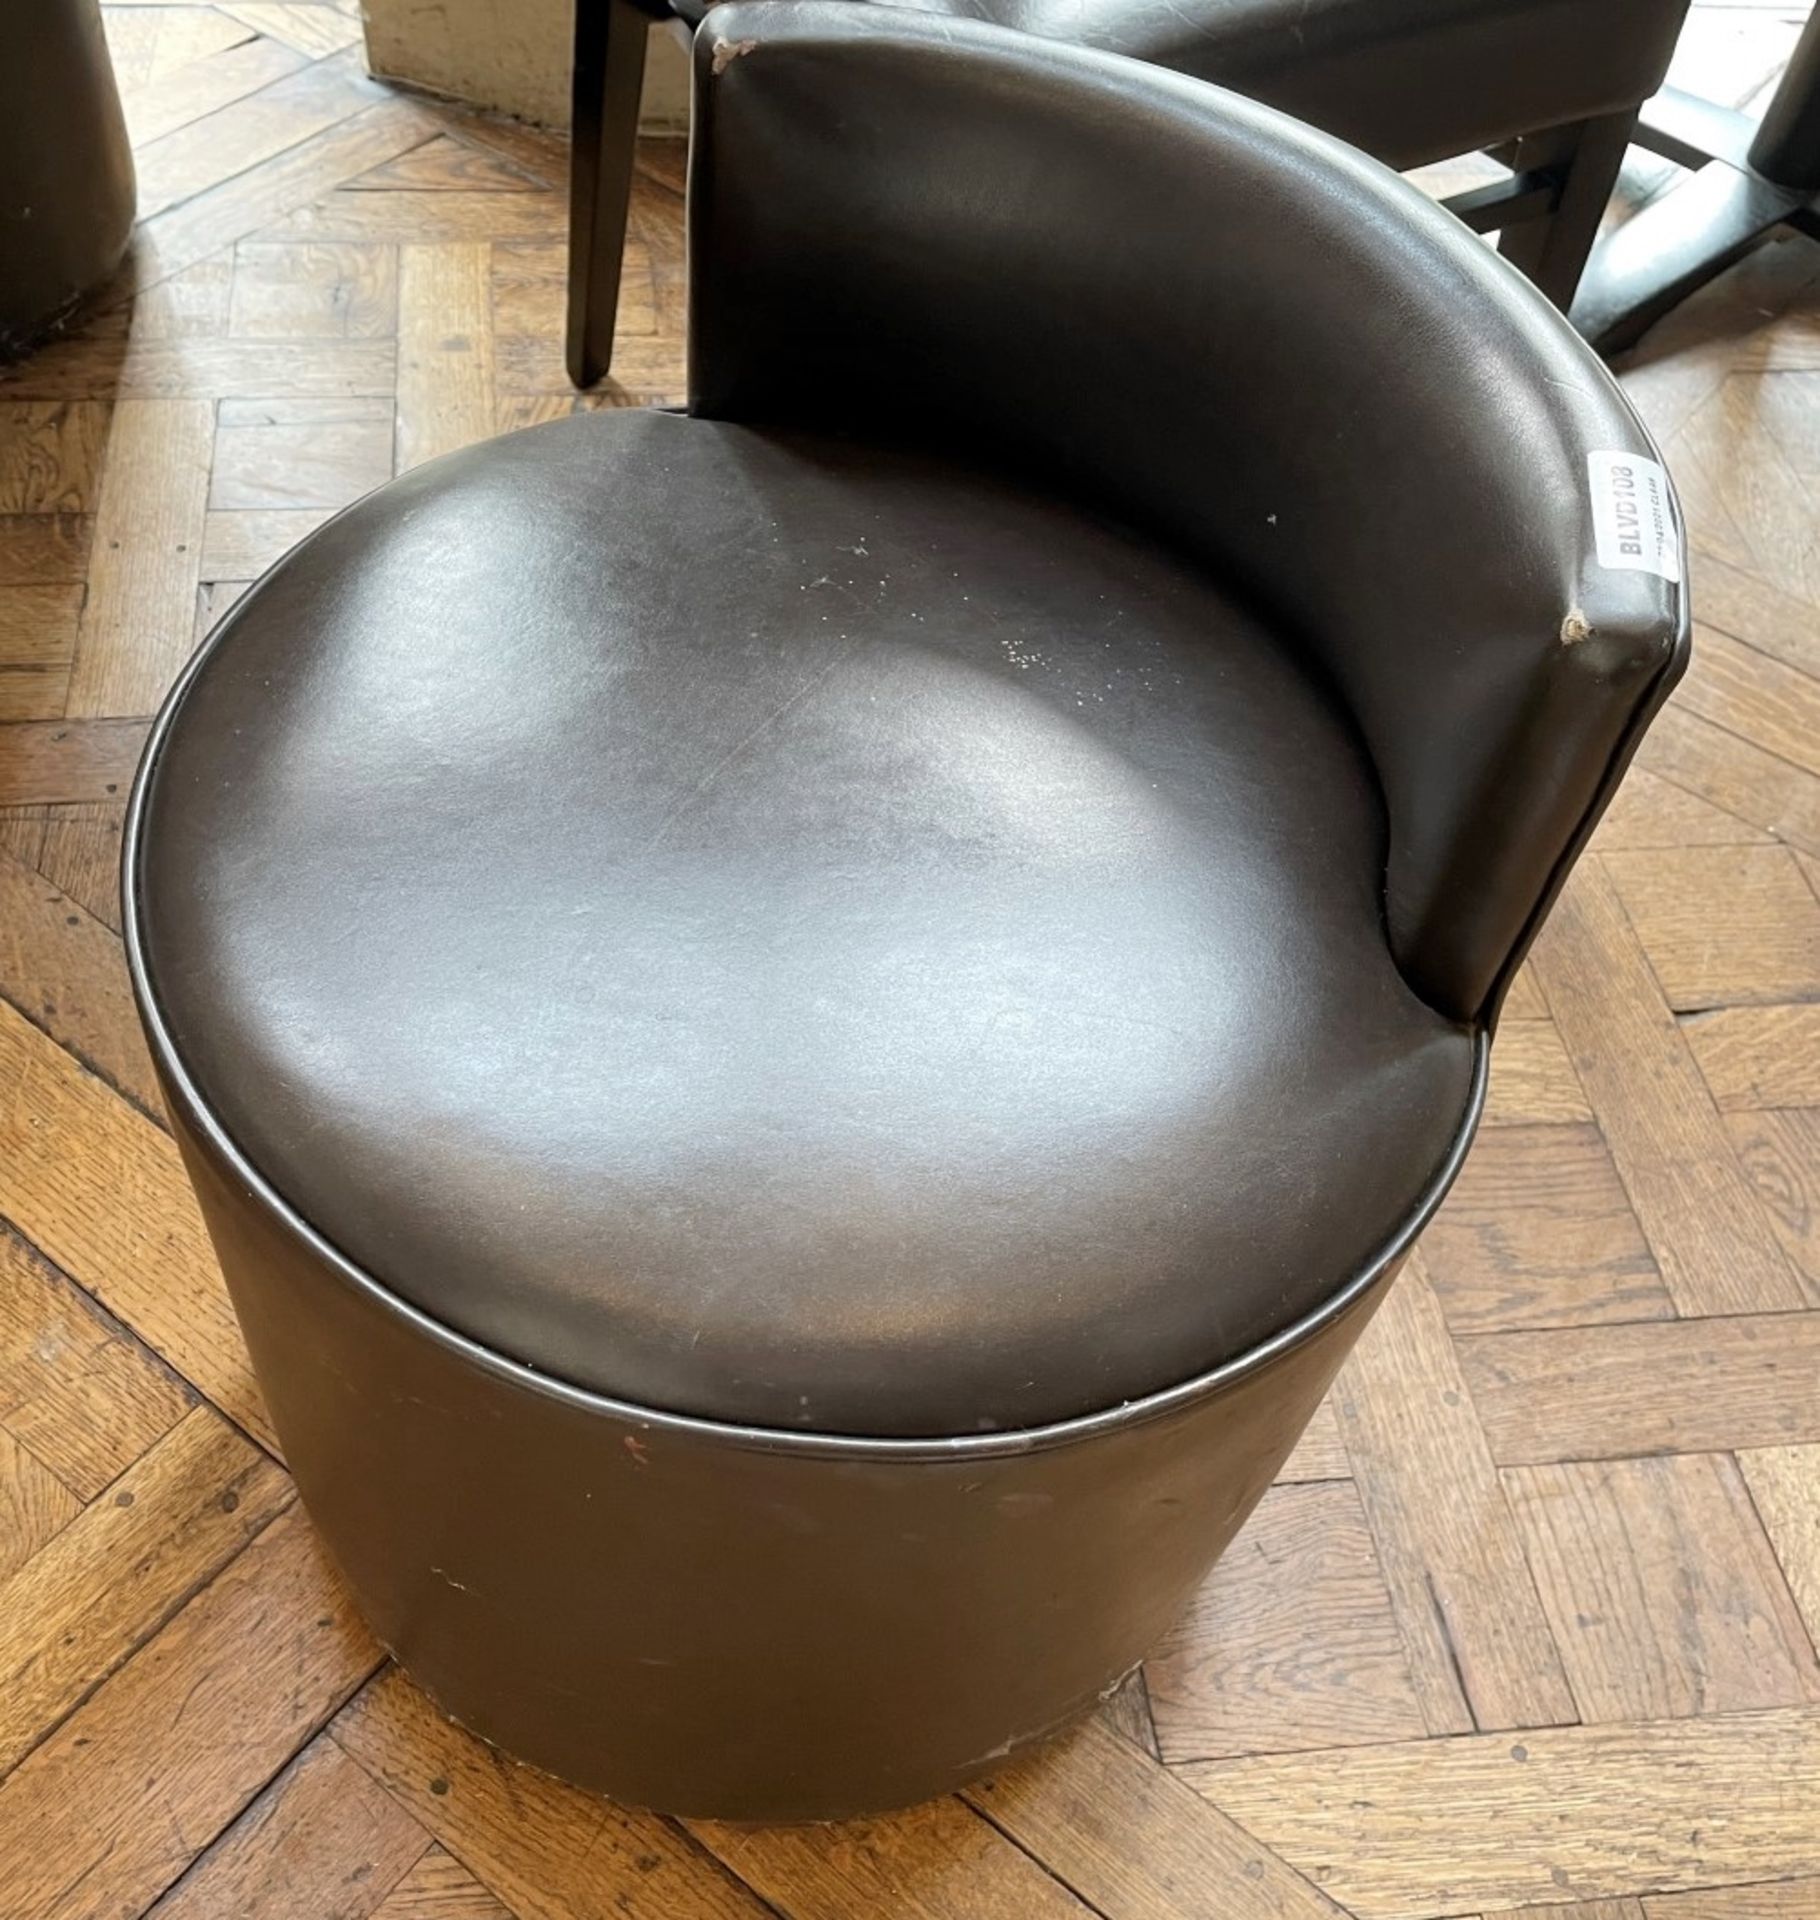 9 x Upholstered Restaurant Low Back Stools - Ref: BLVD108 - CL649 - Location: London W8